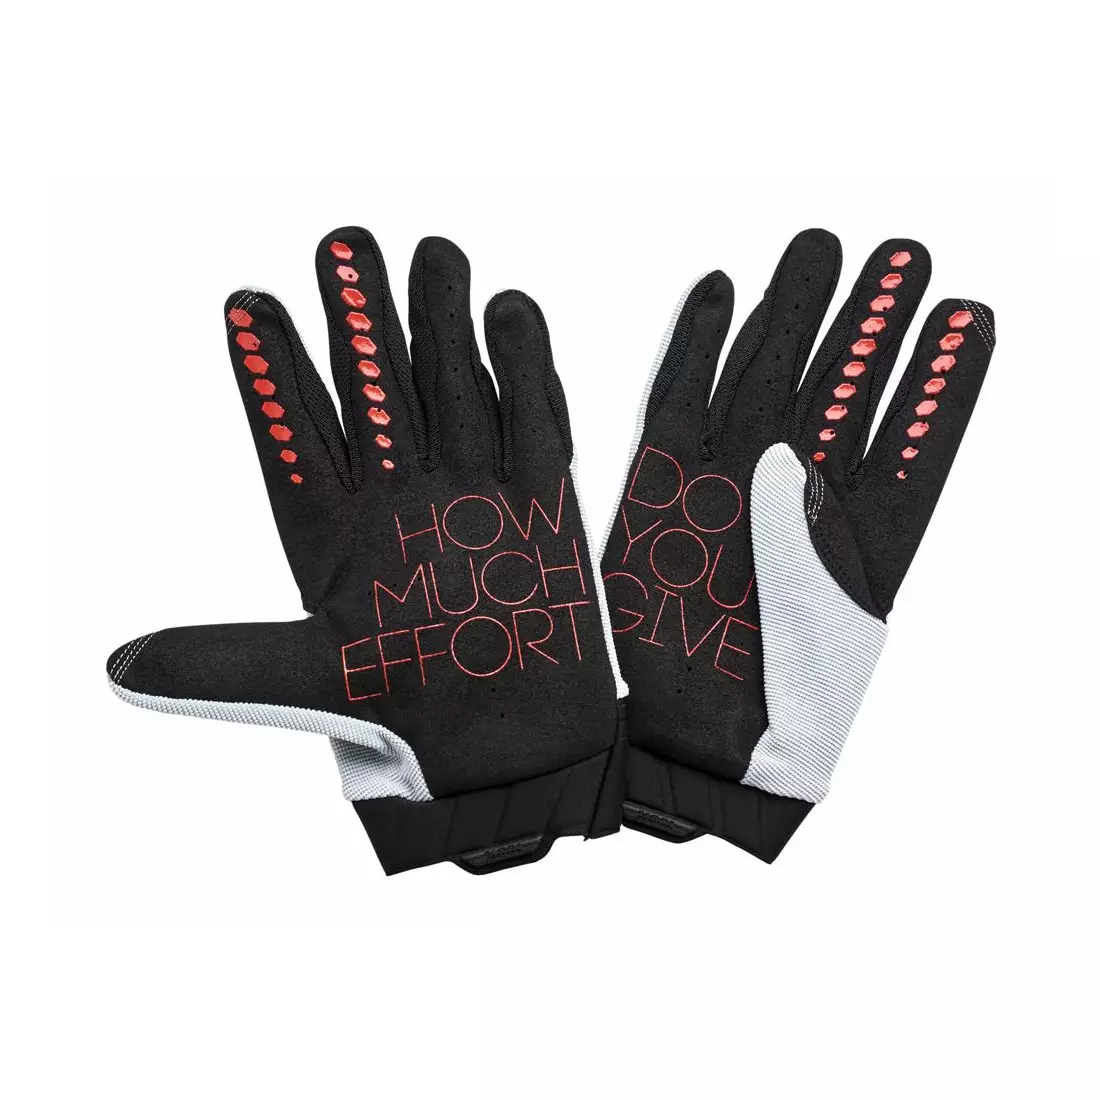 100% GEOMATIC men's cycling gloves, gray-red